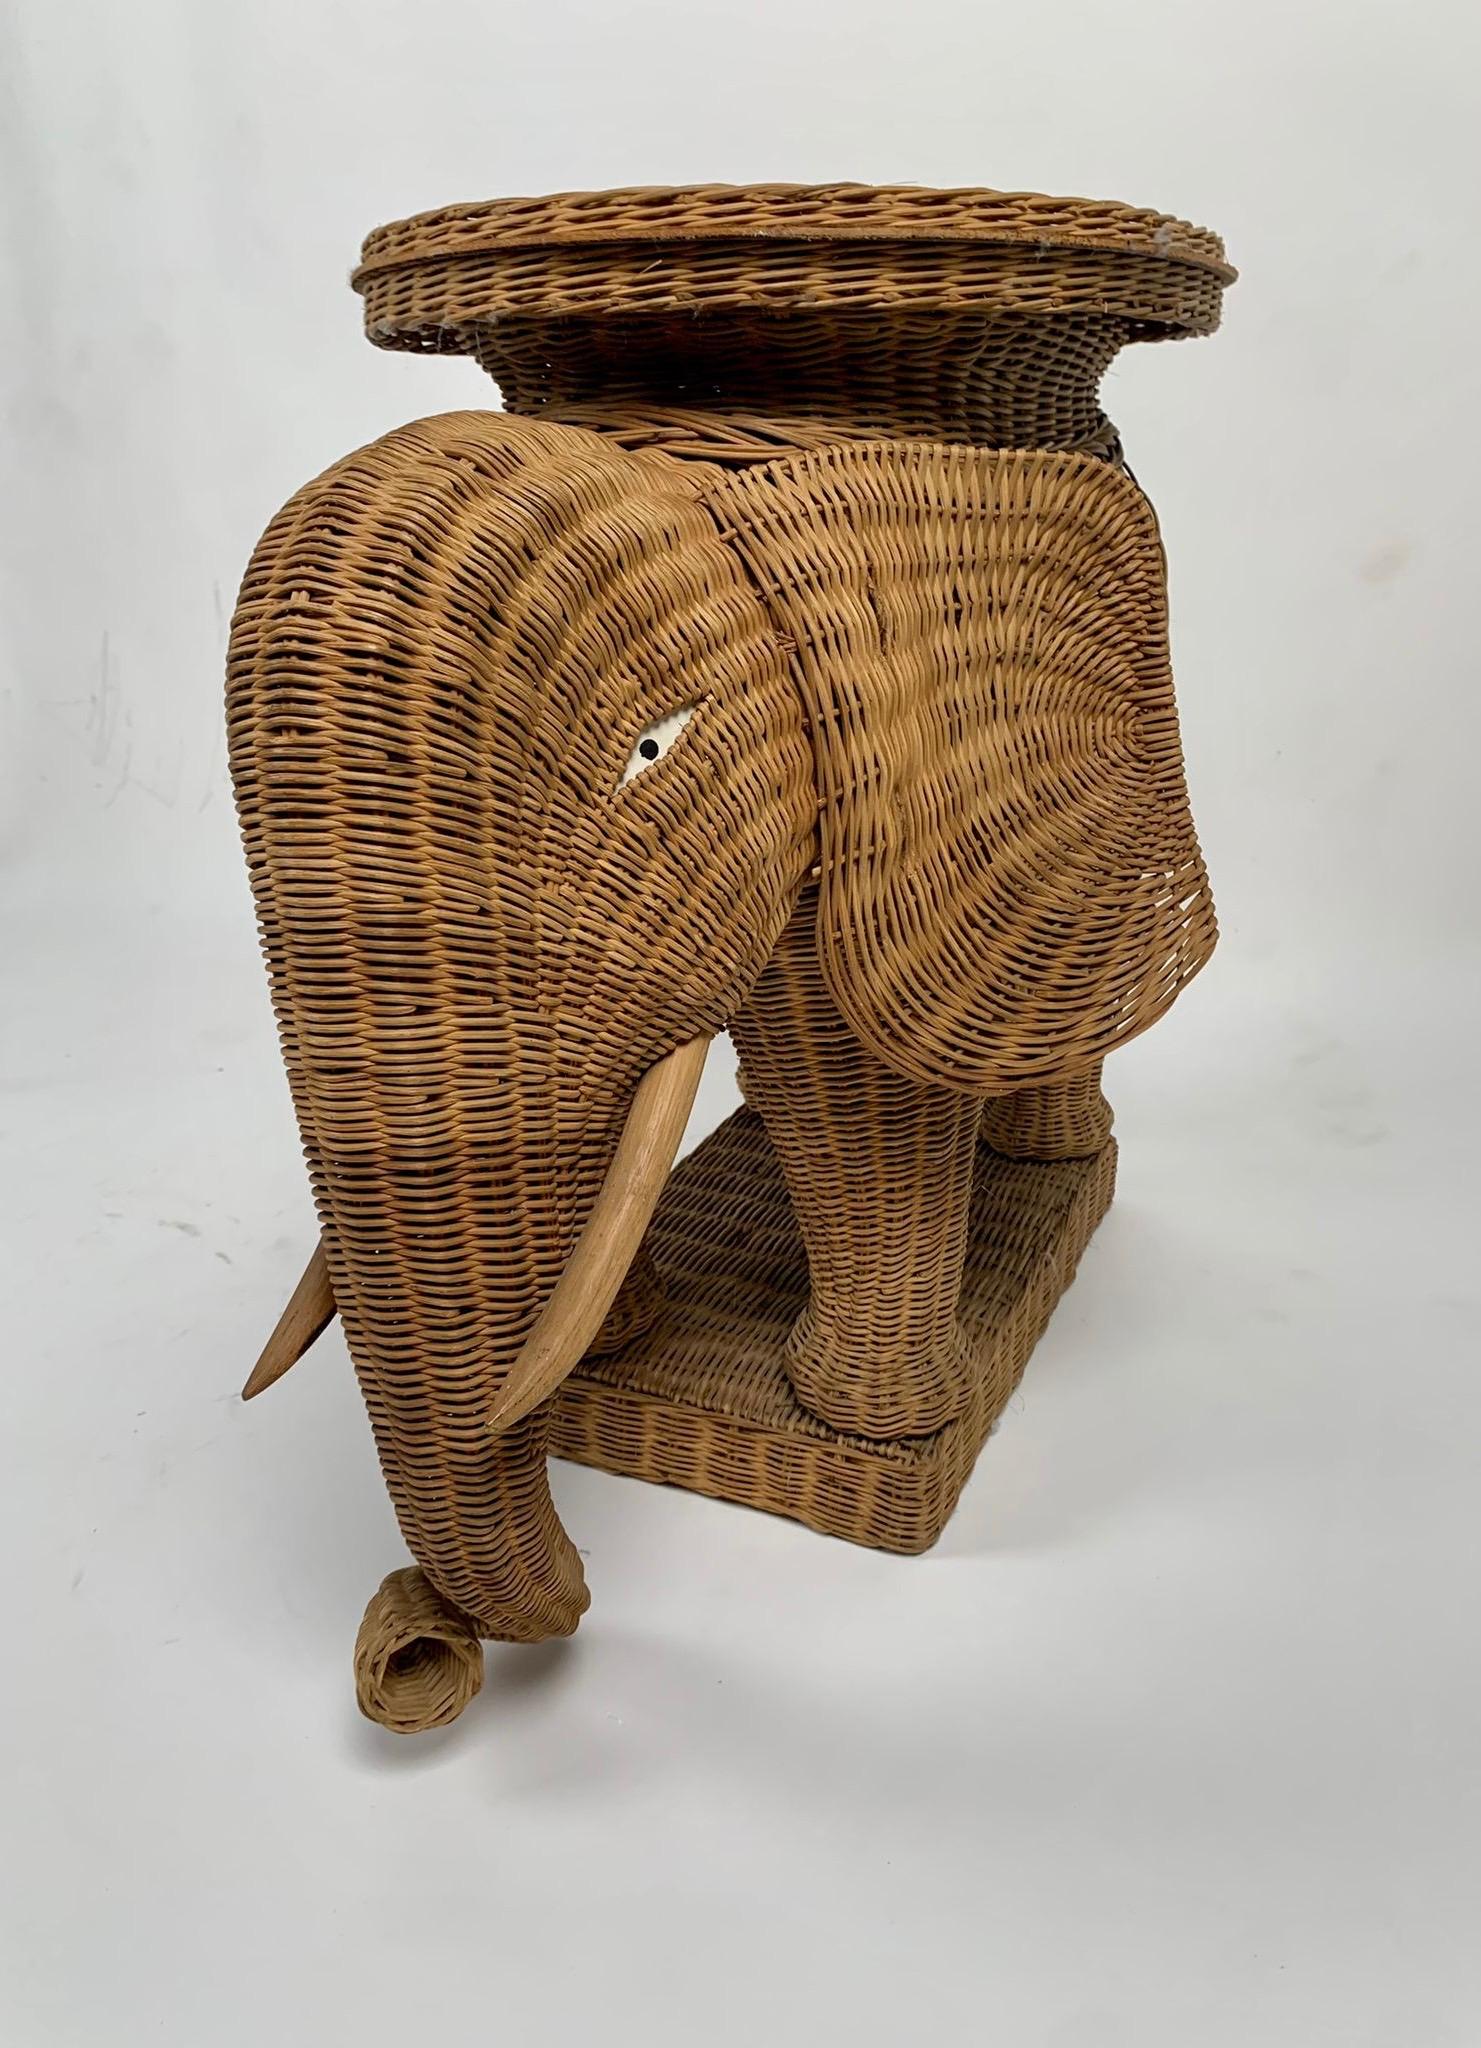 Elephant-shaped wicker table made by Vivai del Sud, Italy, 1970s

Elephant-shaped wicker table produced by the historic Italian company Vivai del Sud in the 1970s. 

Very good condition, slight signs of time, visible in photo.
Measurements 72 x 38 x